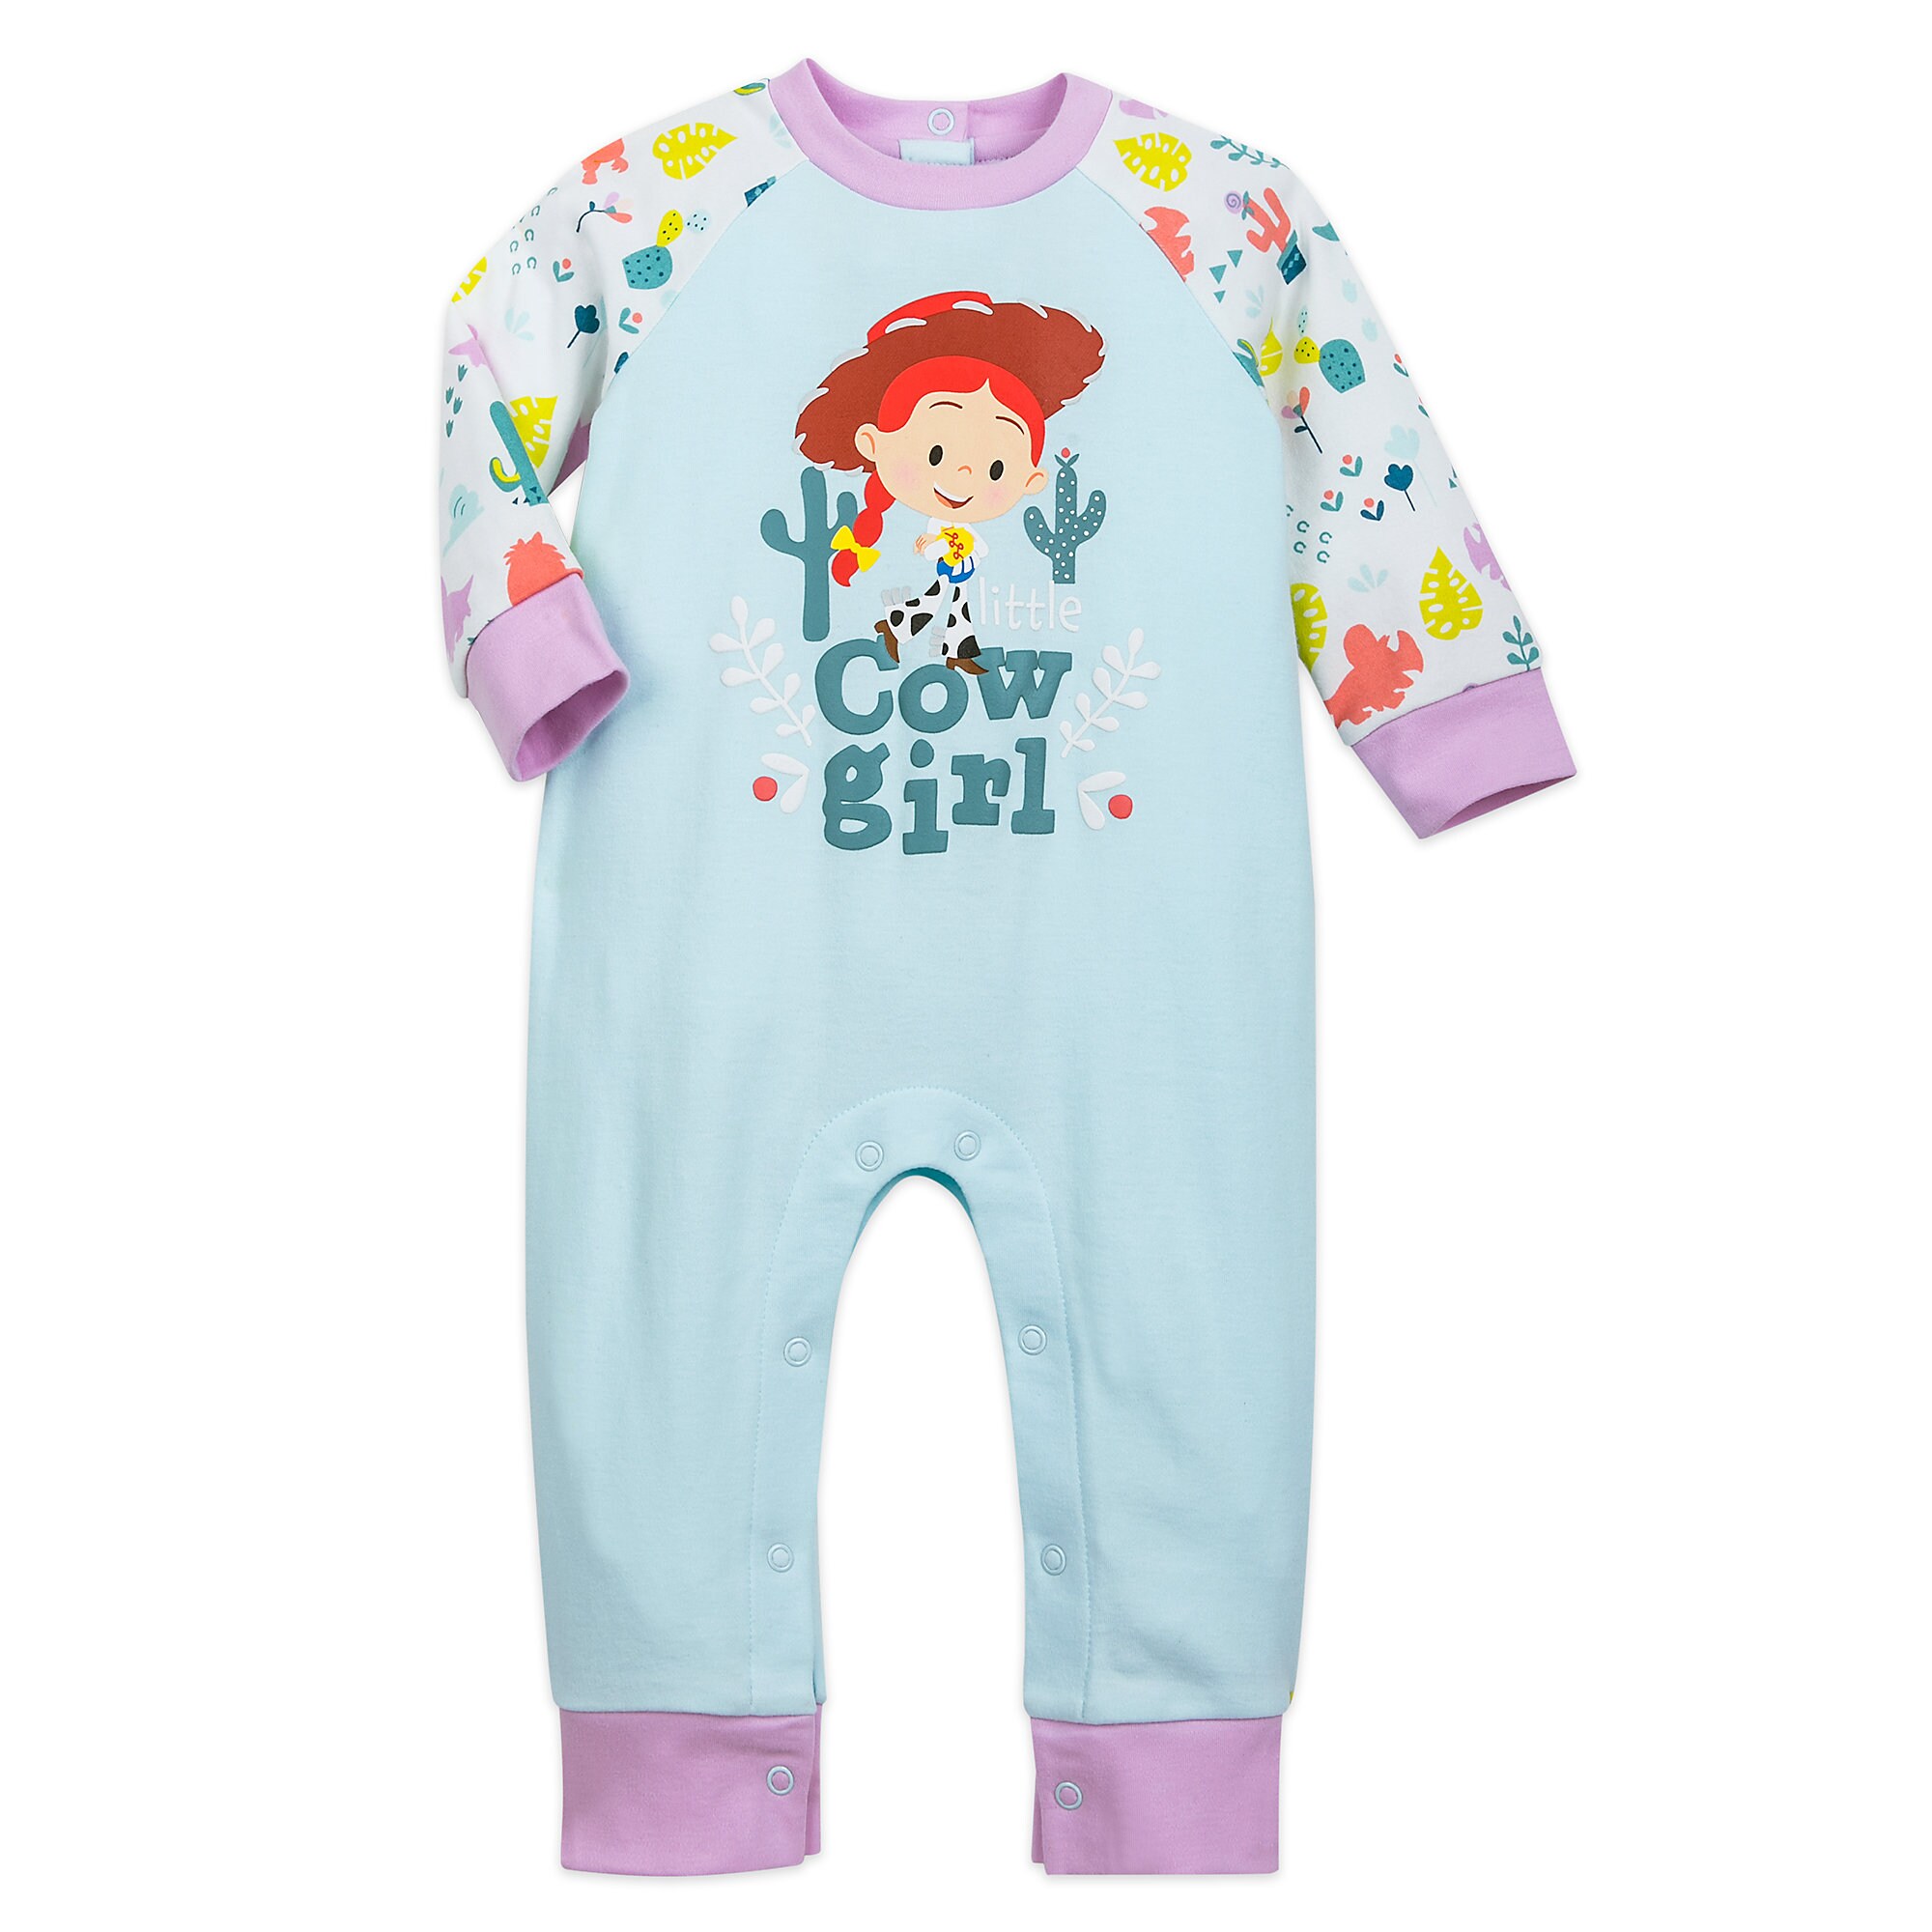 Jessie Gift Set for Baby - Toy Story